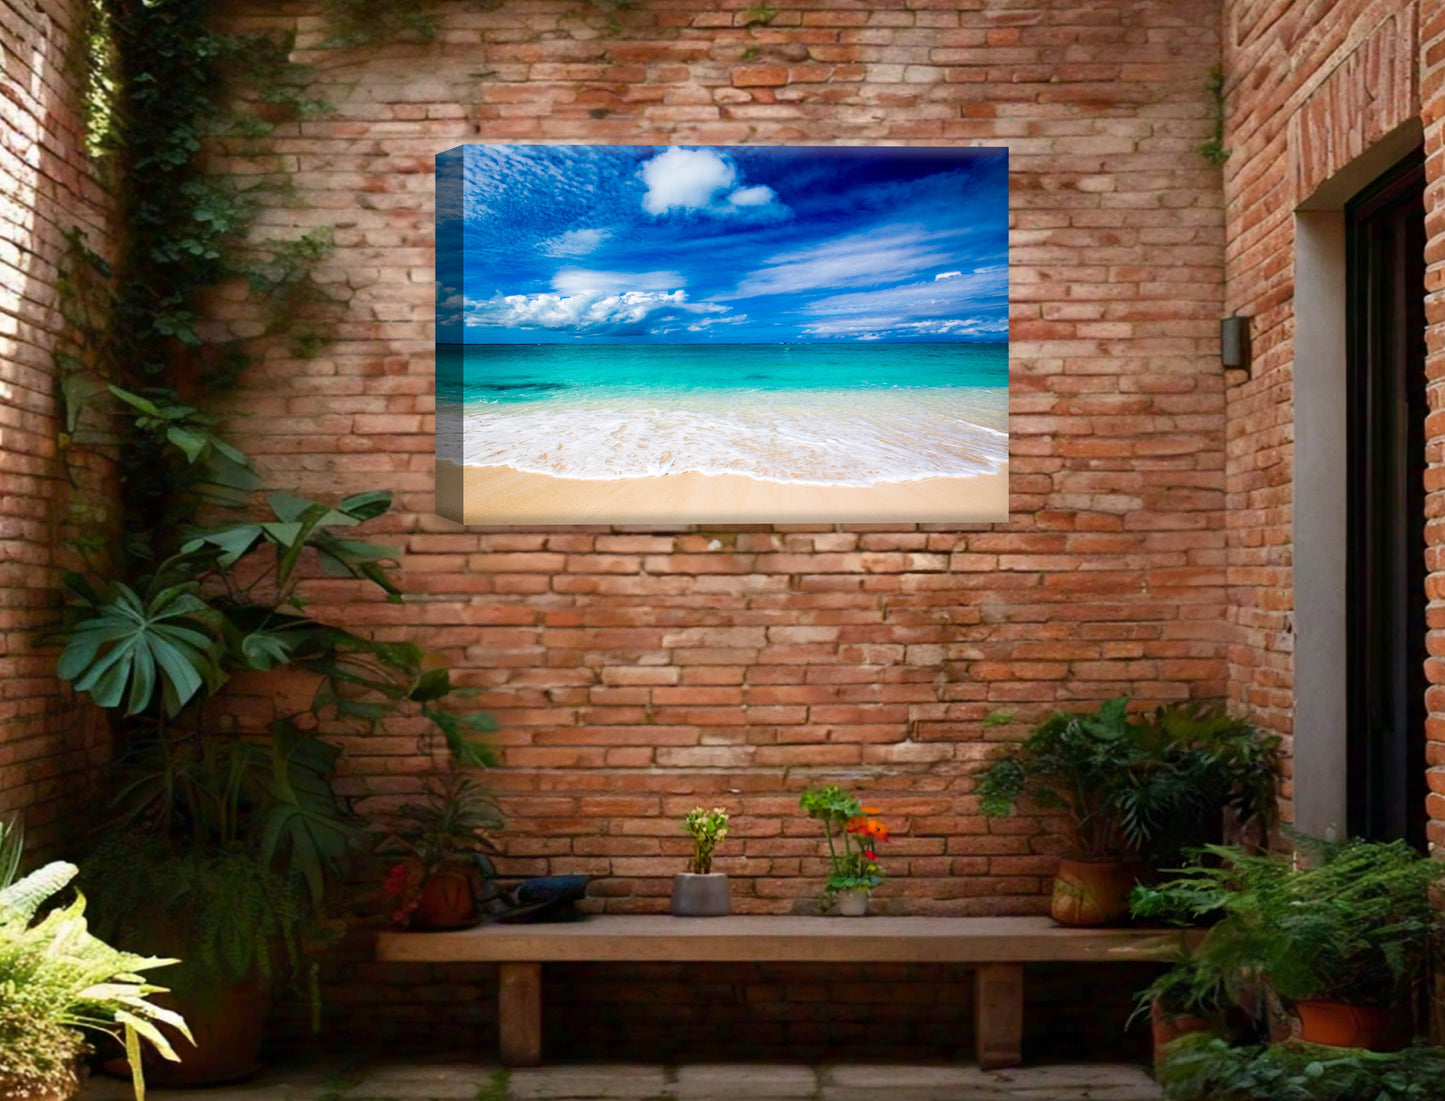 White Sand Beach - Evening on the Pond - Canvas Wrap - Waterproof on Patio 3 Wall